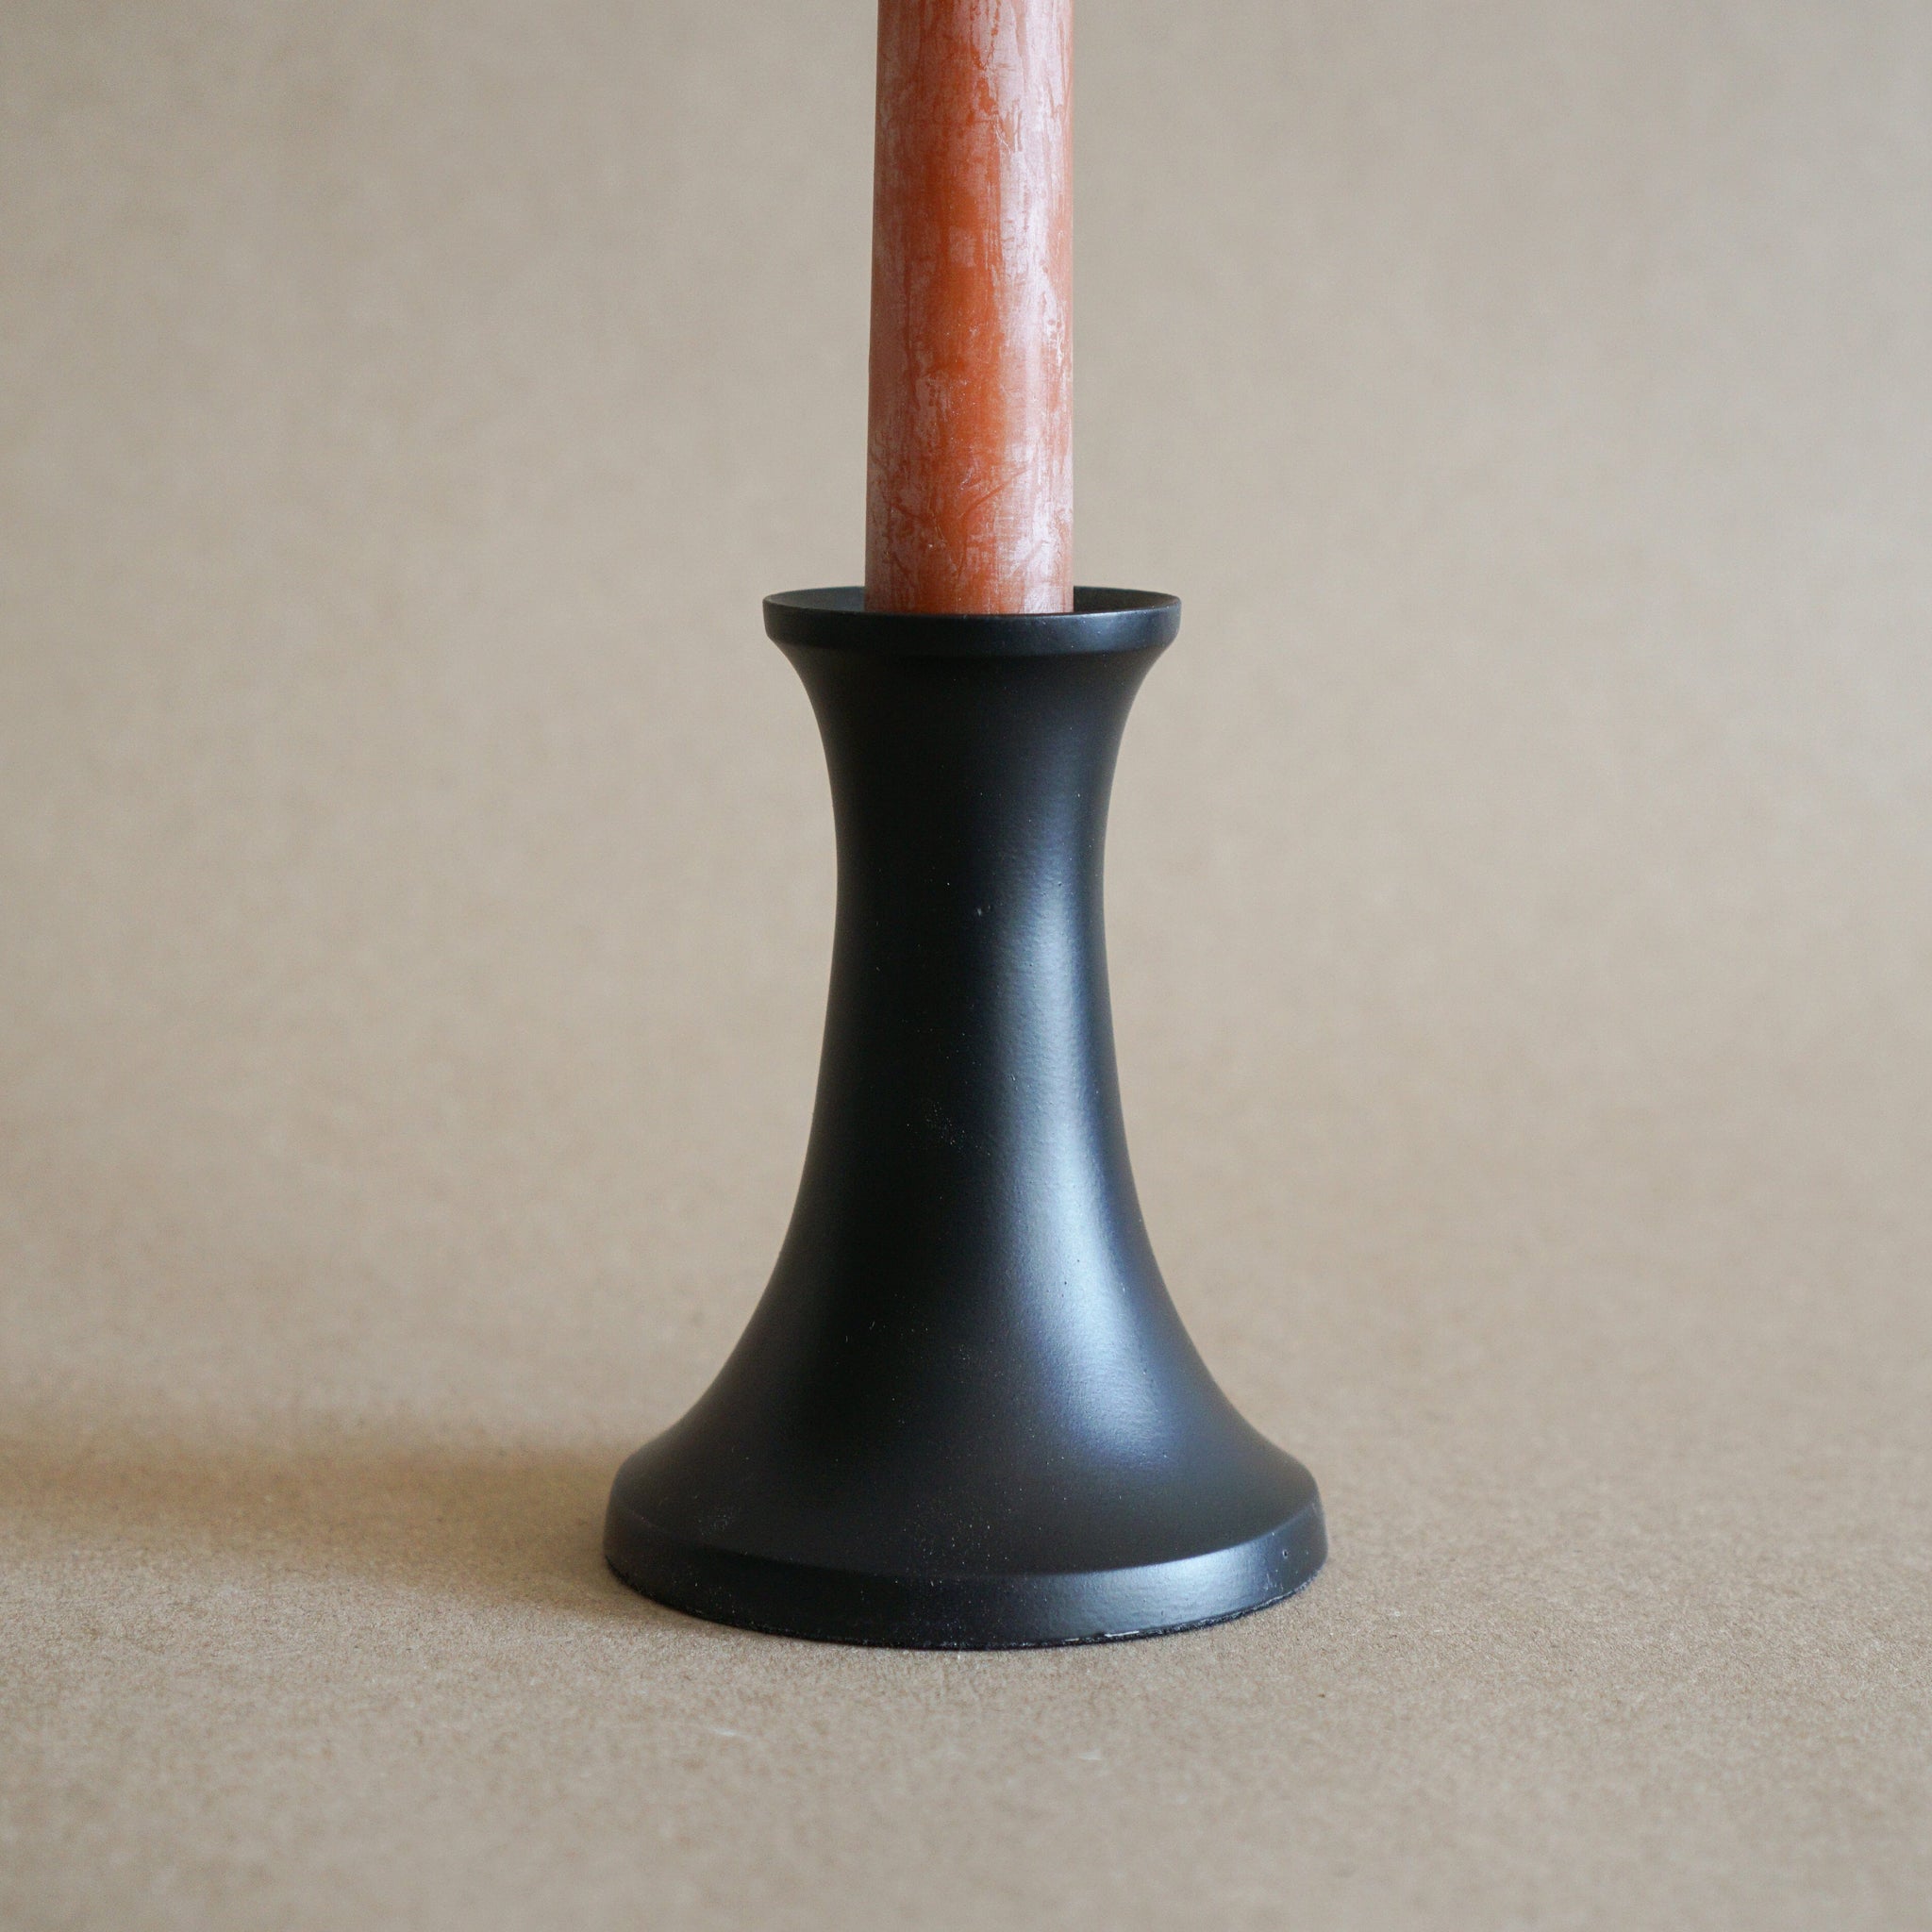 Hawkins New York Decor Extra Small Simple Black Candle Holder